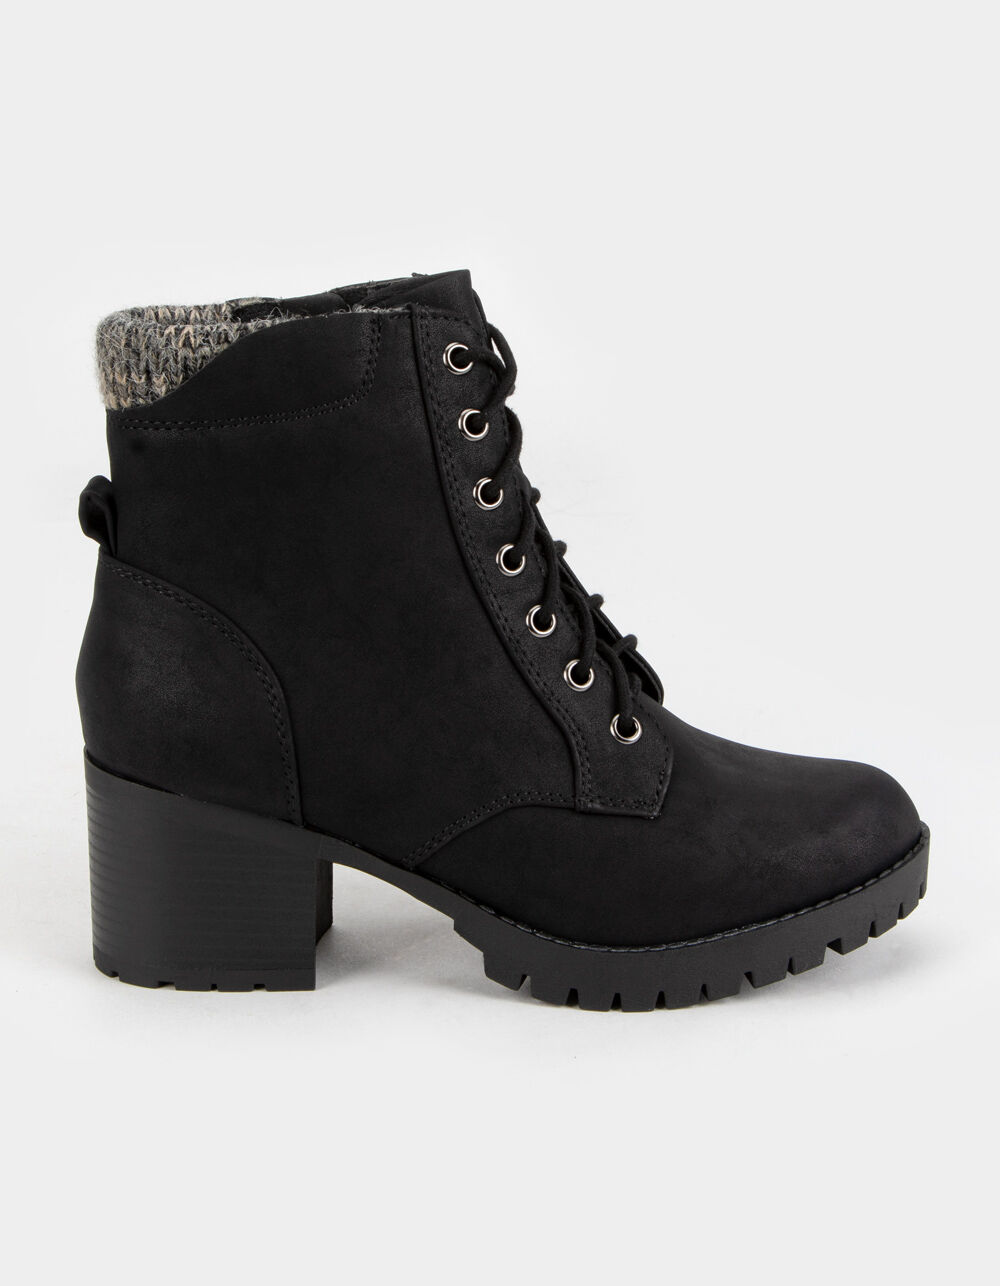 SODA Lace Up Womens Black Booties - BLACK | Tillys